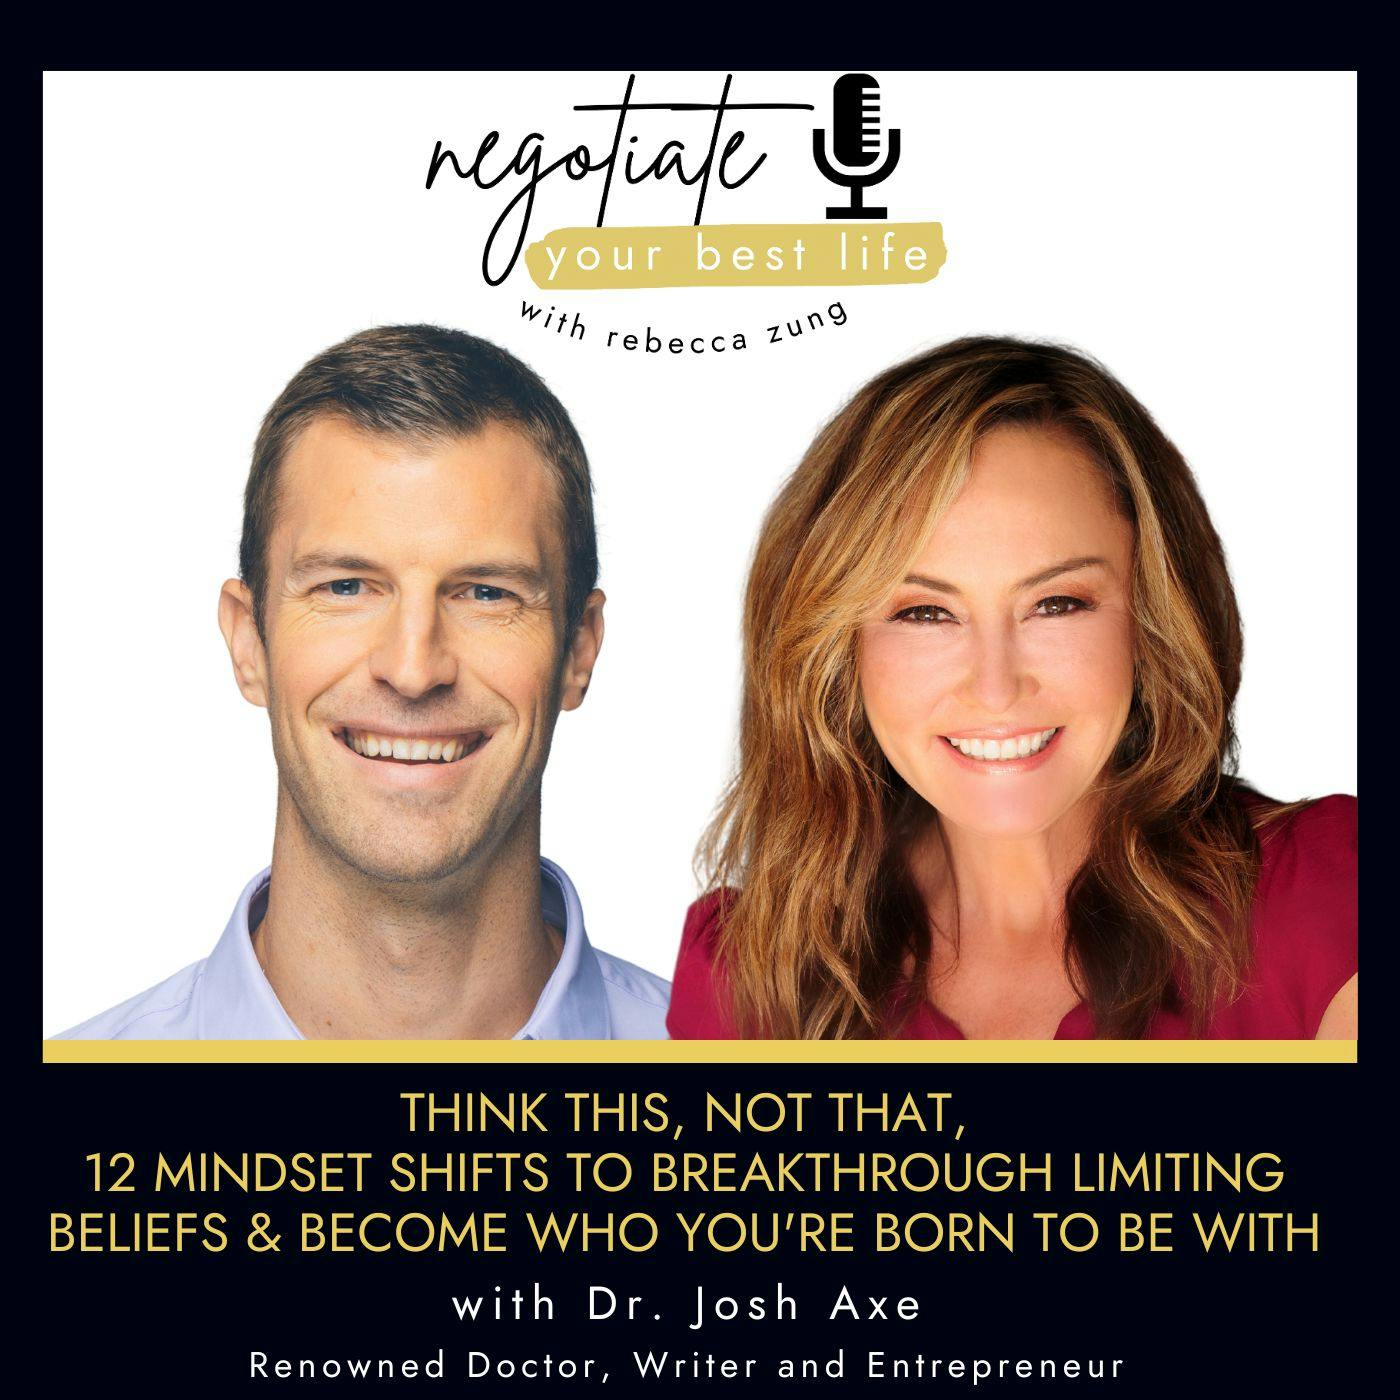 Think This, Not That, 12 Mindset Shifts to Breakthrough Limiting Beliefs and Become Who You're Born to Be With Guest Dr. Josh  Axe & Rebecca Zung on Negotiate Your Best Life #506